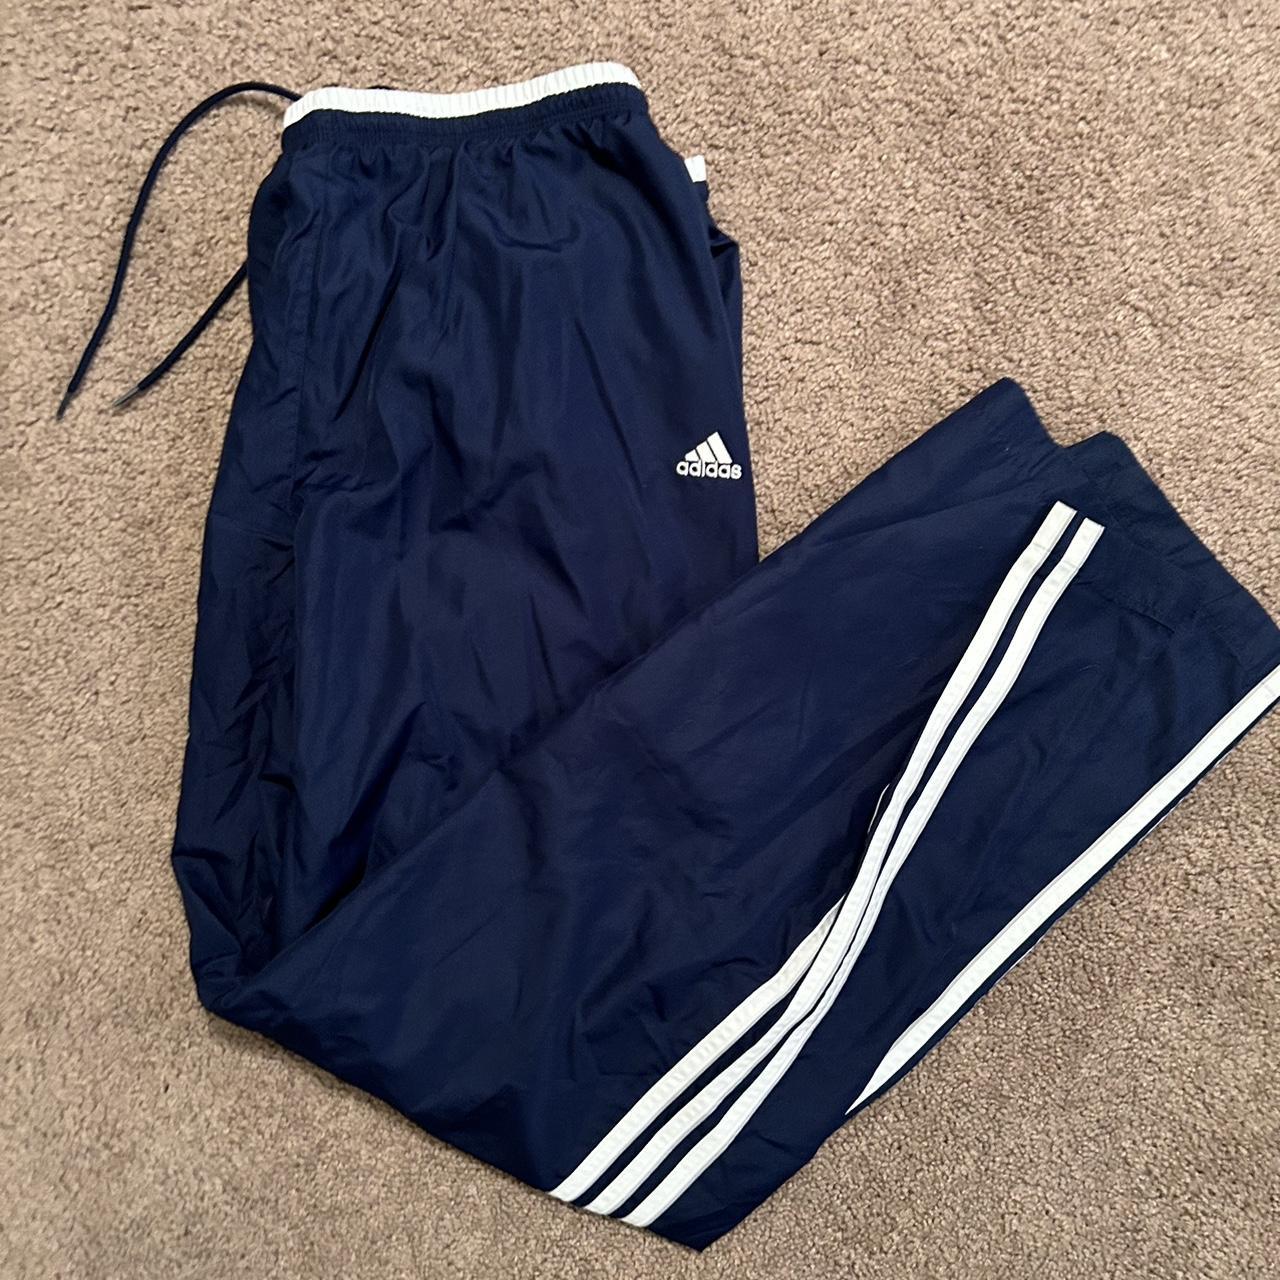 Adidas Men's Navy and White Joggers-tracksuits